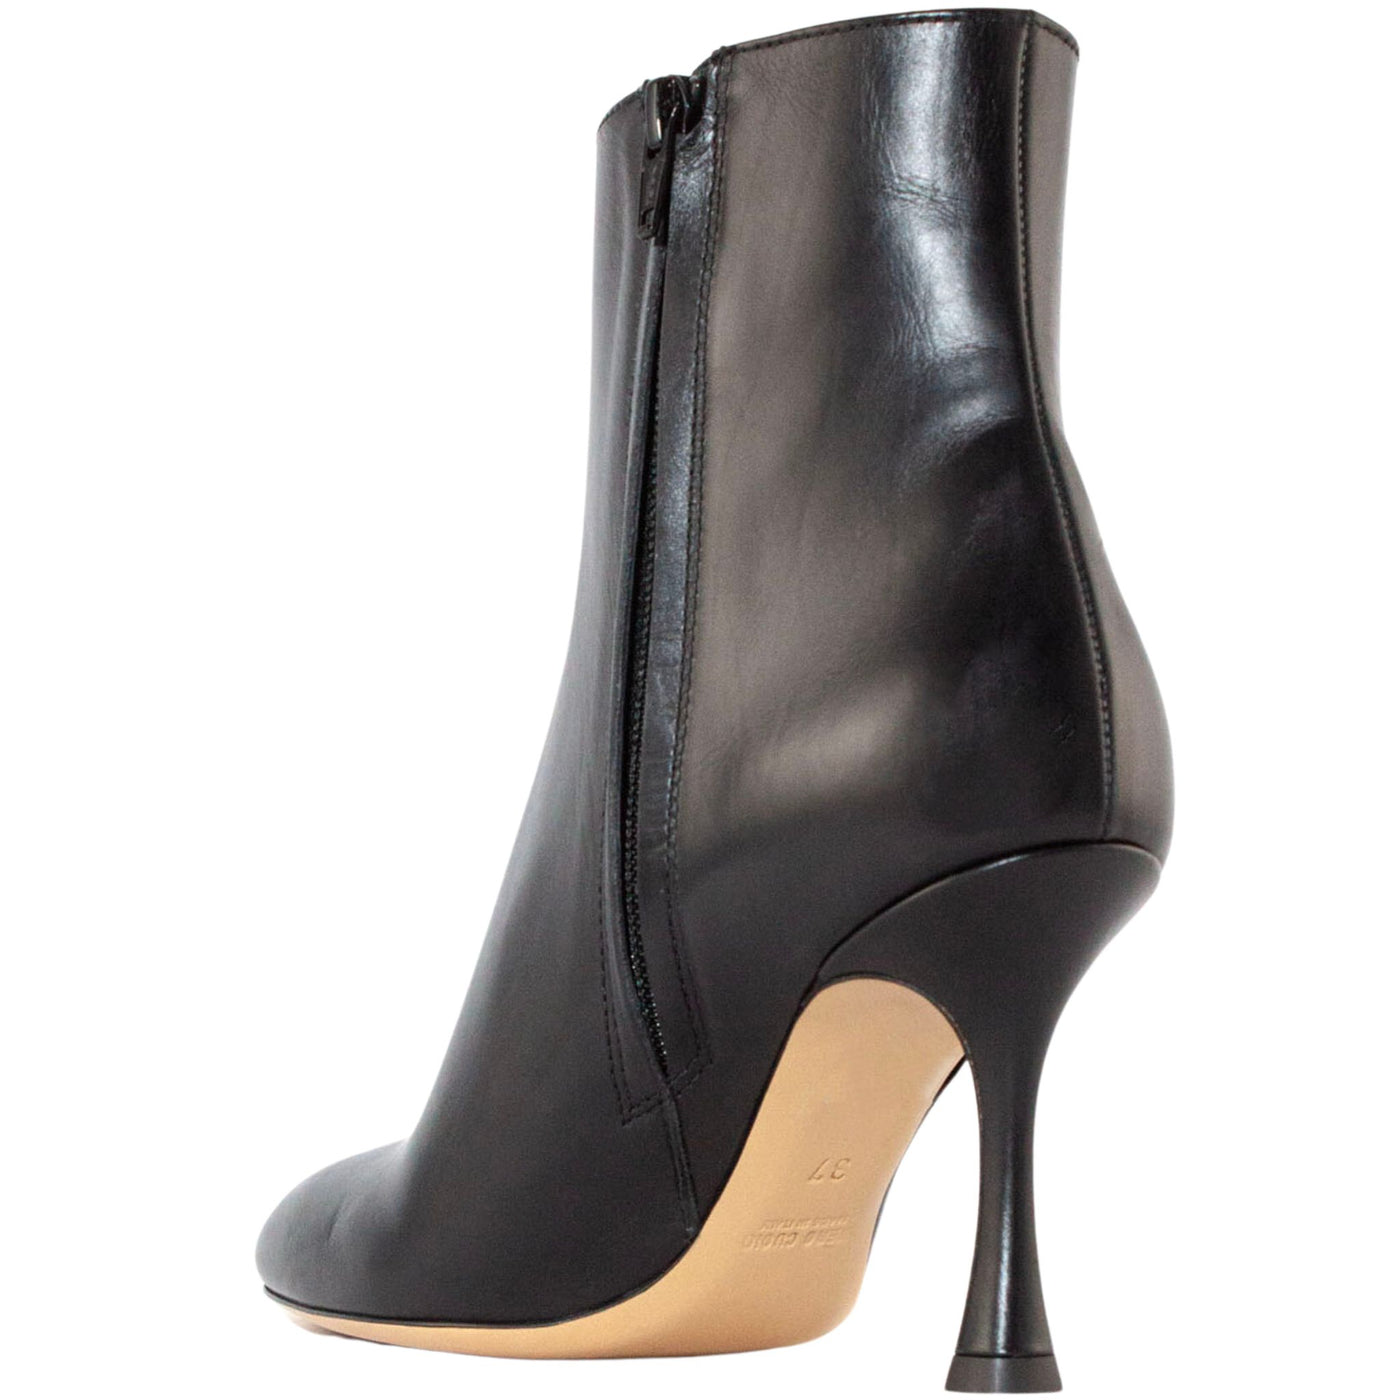 Women's leather boots with zip closure